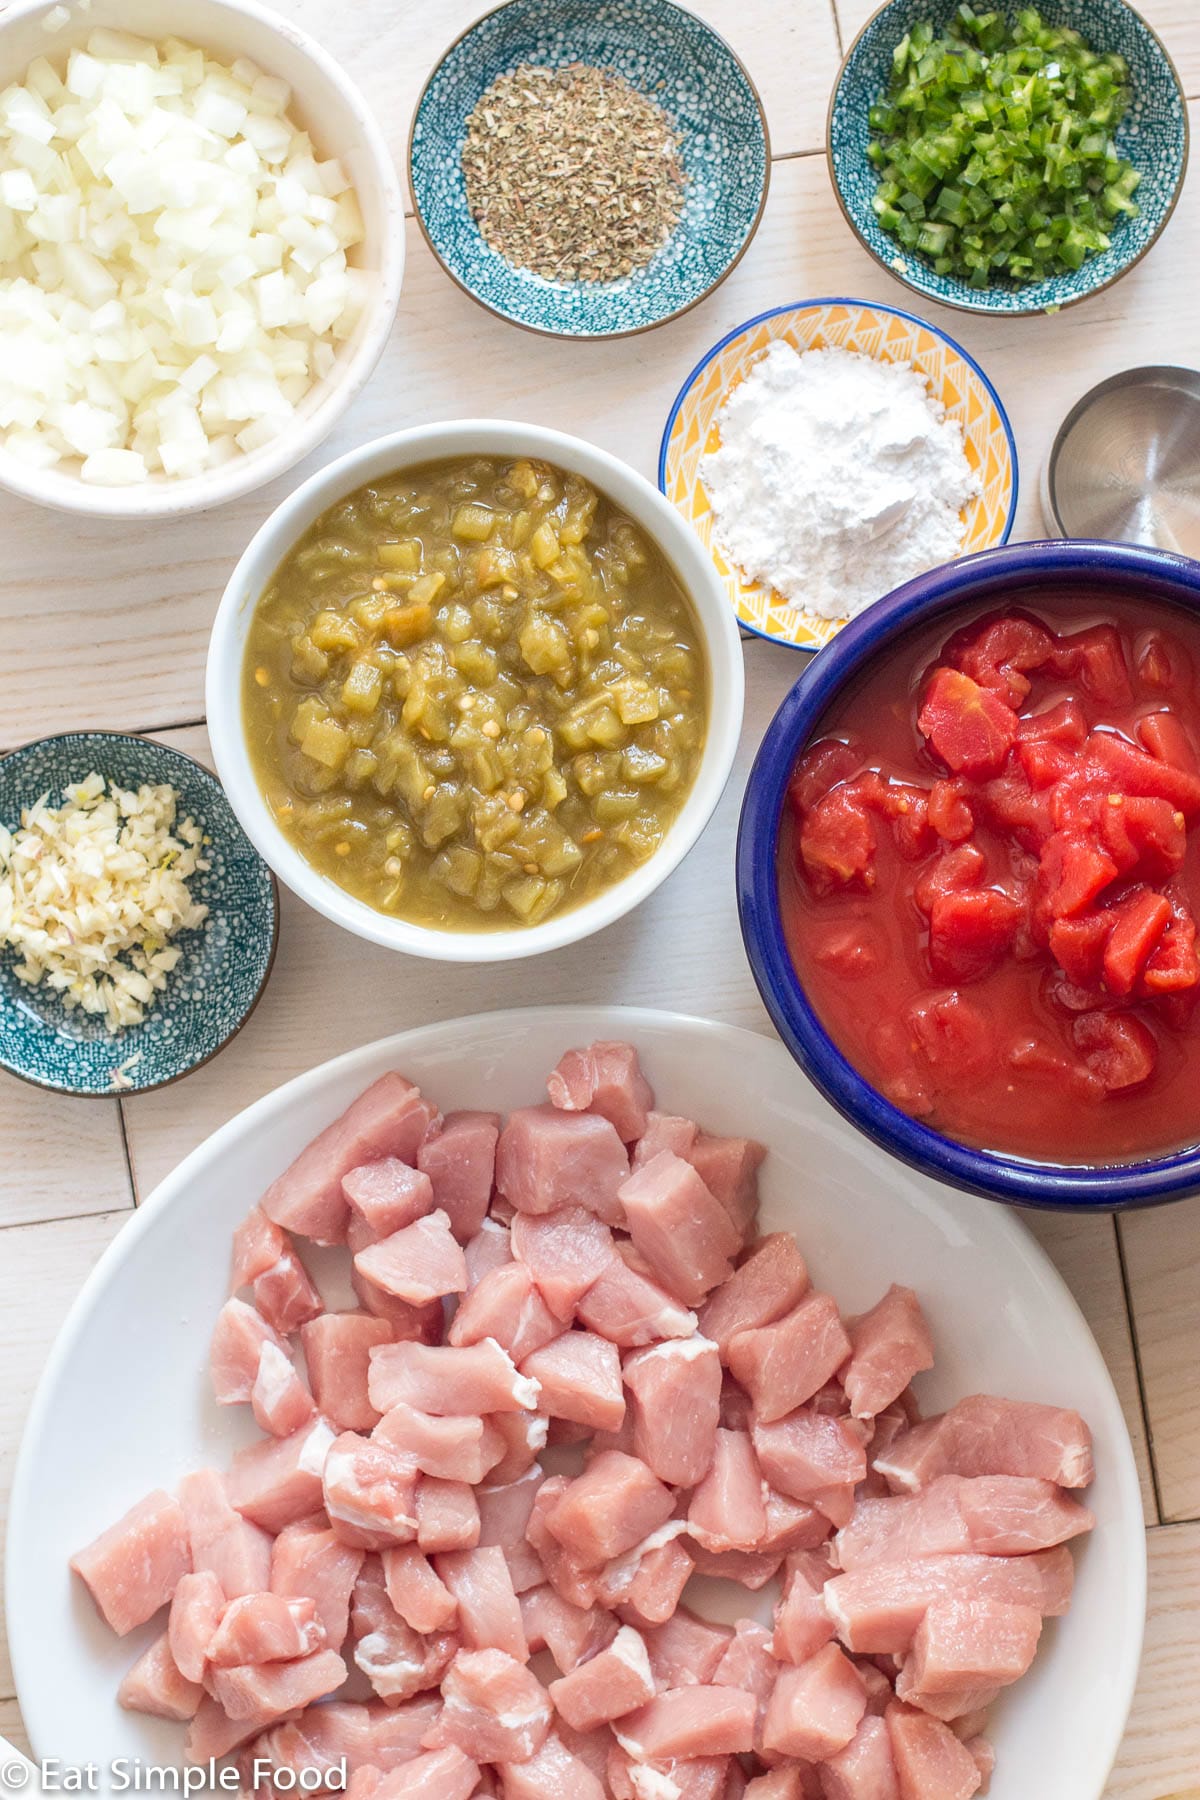 Ingredients: diced pork chop, bowl of canned diced tomatoes, bowl of green chiles, bowl of diced onions, and four small containers of minced garlic, cornstarch, dried oregano, and diced jalapeno.